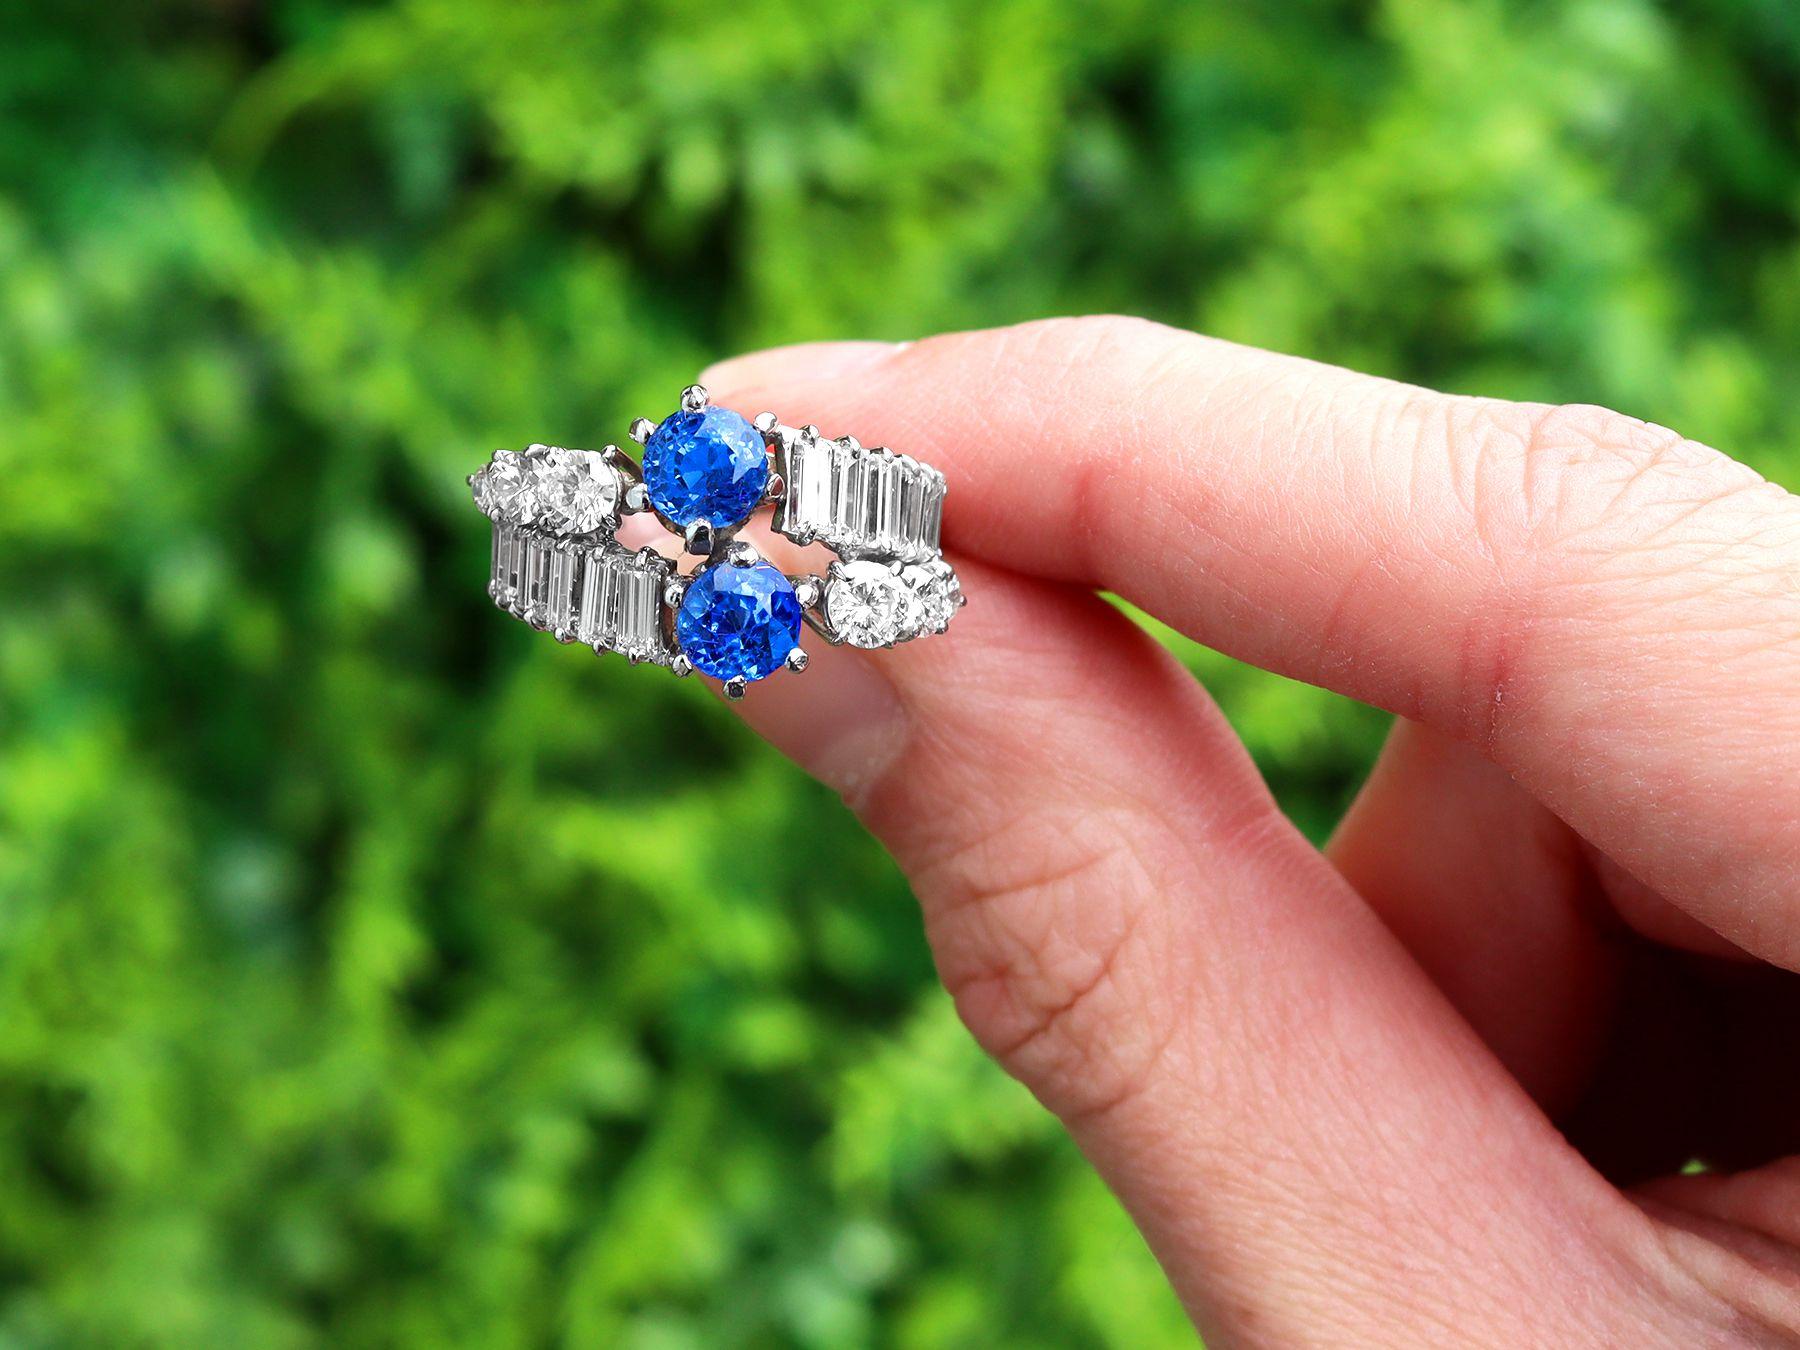 A stunning, fine and impressive vintage 1.38 carat blue sapphire and 2.55 carat diamond, 18 carat white gold dress ring; part of our diverse vintage jewellery collections.

This stunning, fine and impressive vintage sapphire and diamond ring has